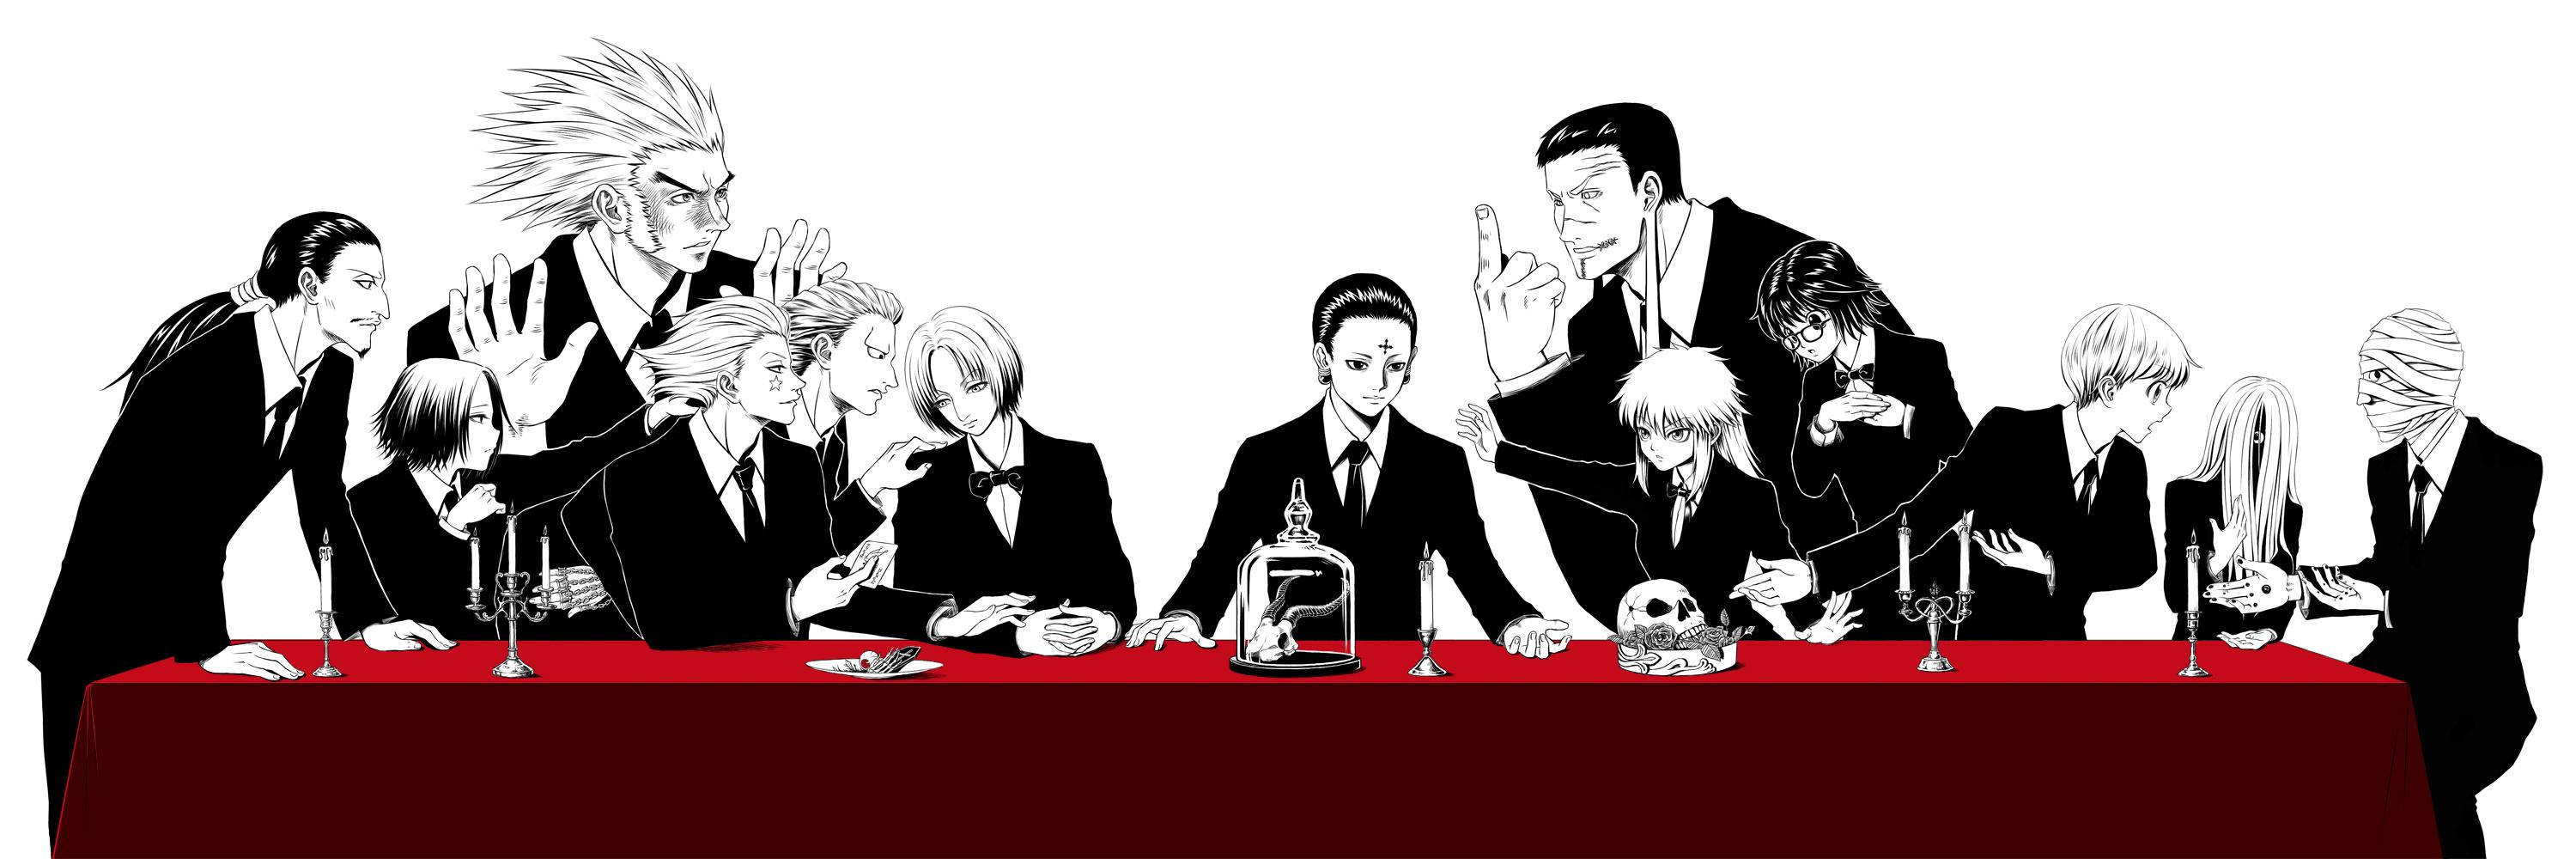 Phantom Troupe On Red Table Wallpaper